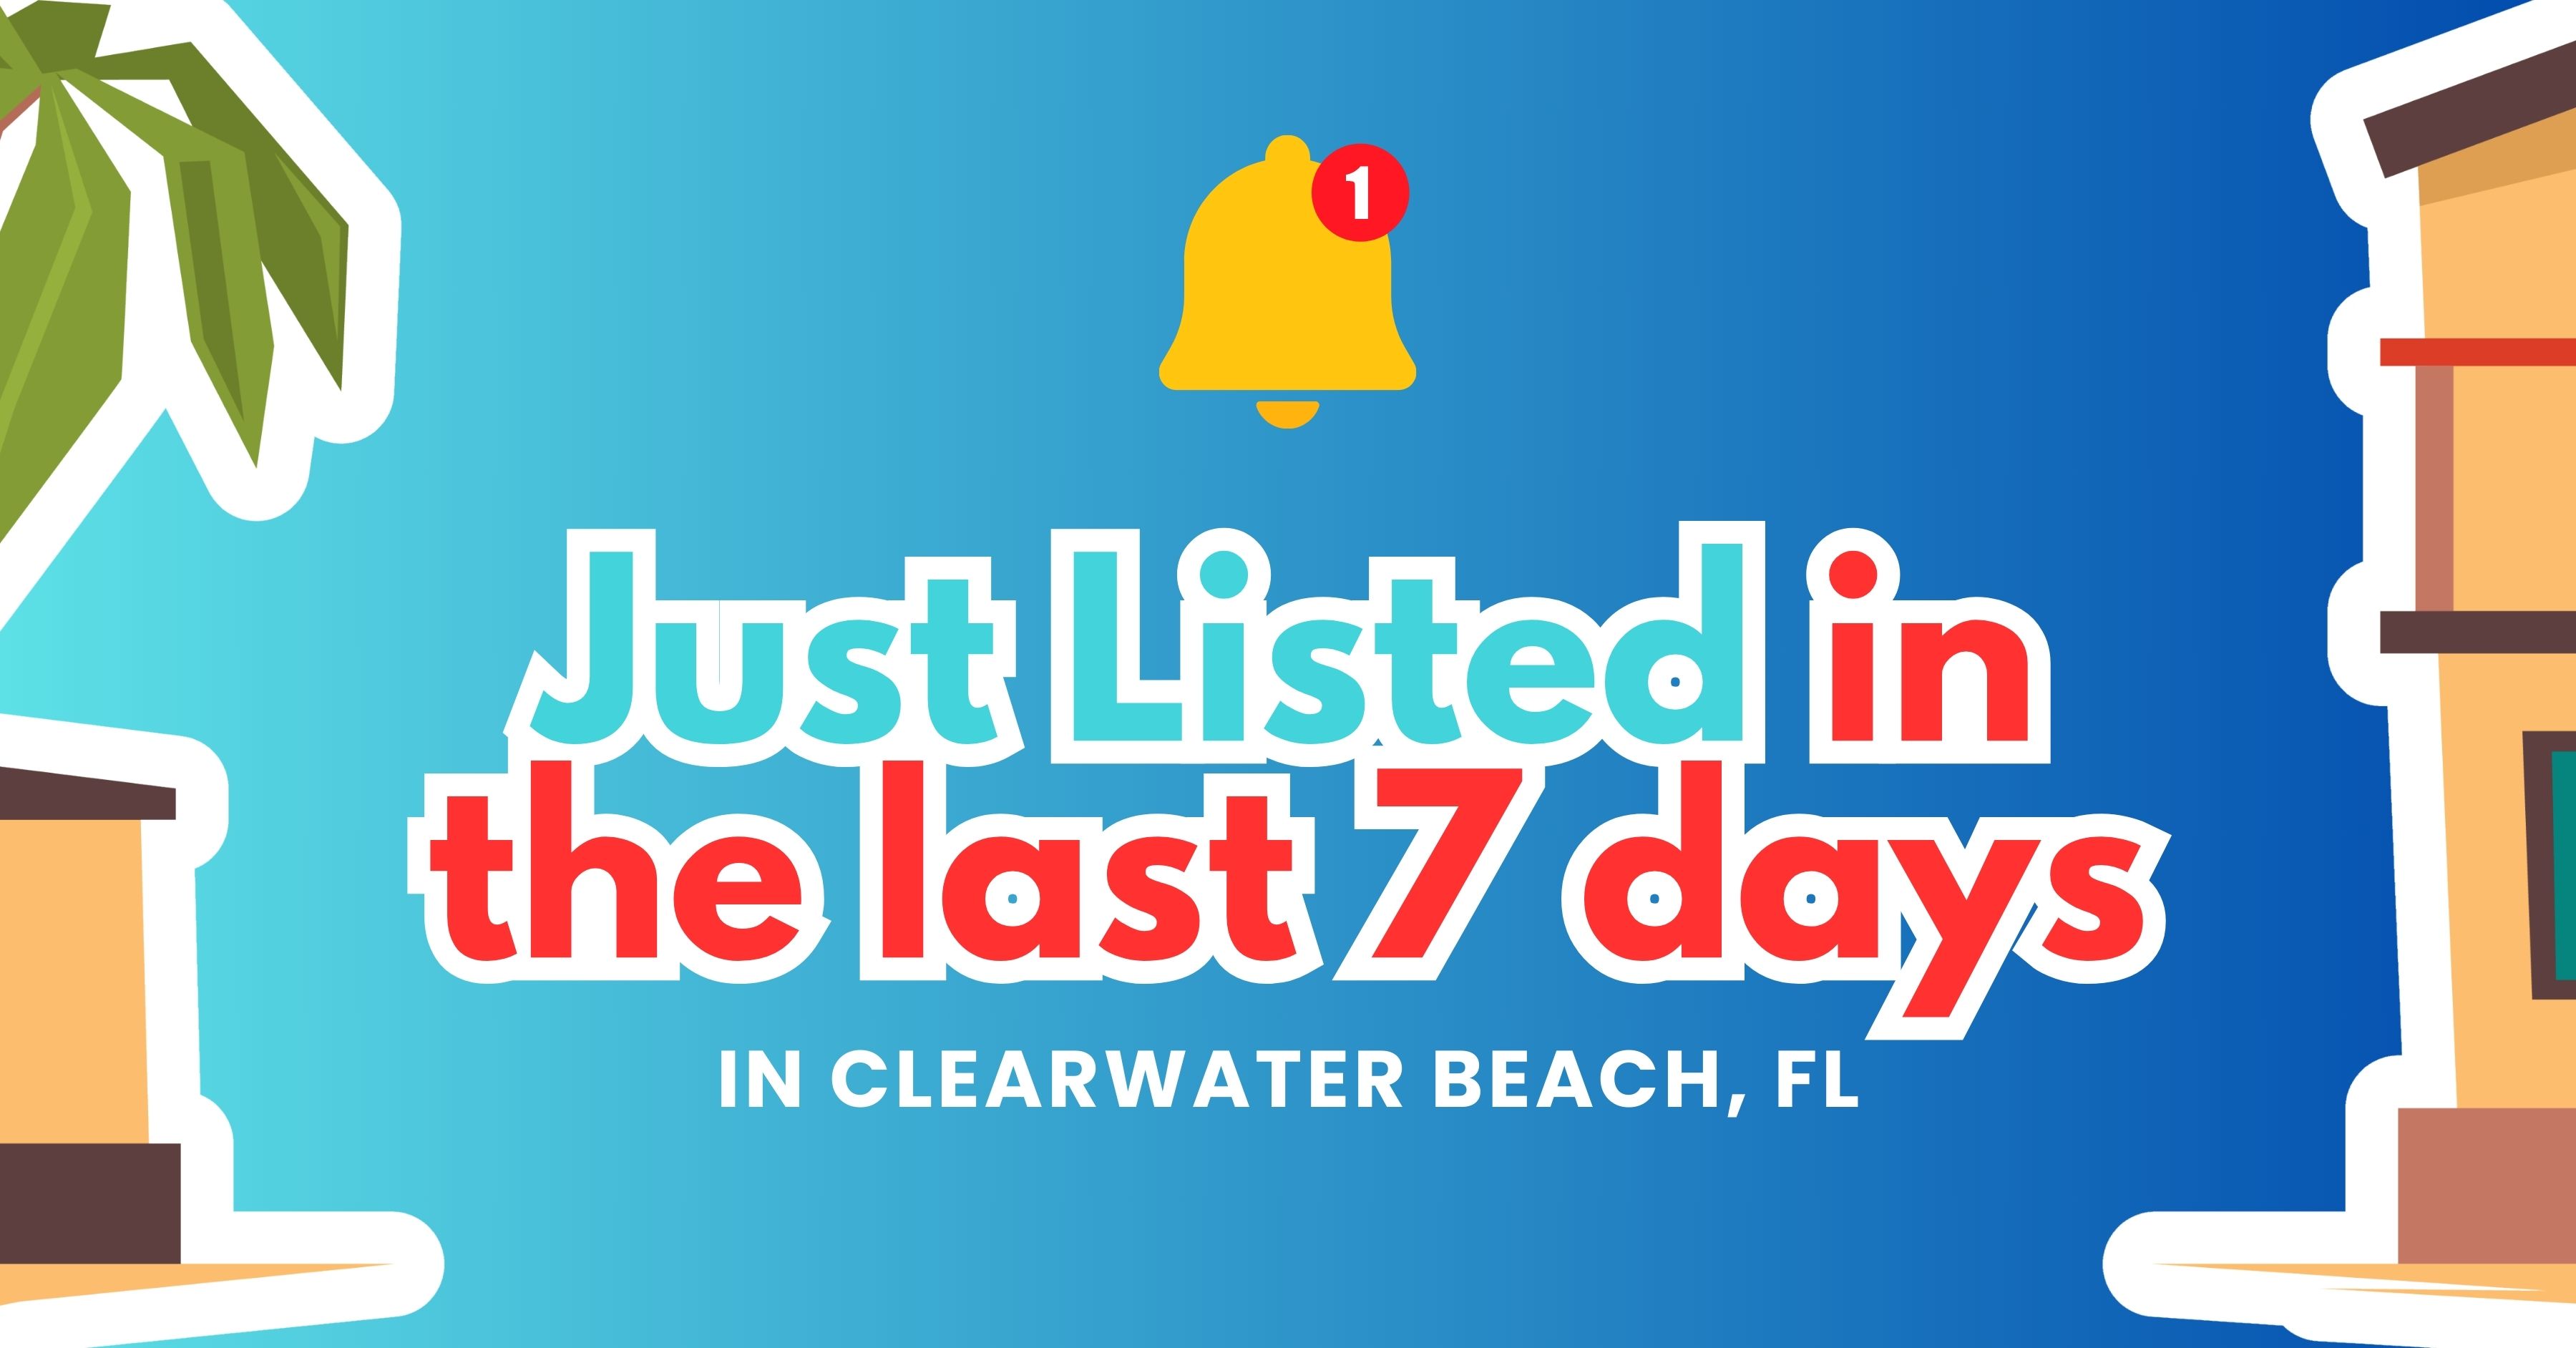 Just Listed in the last 7 days in Clearwater Beach, FL